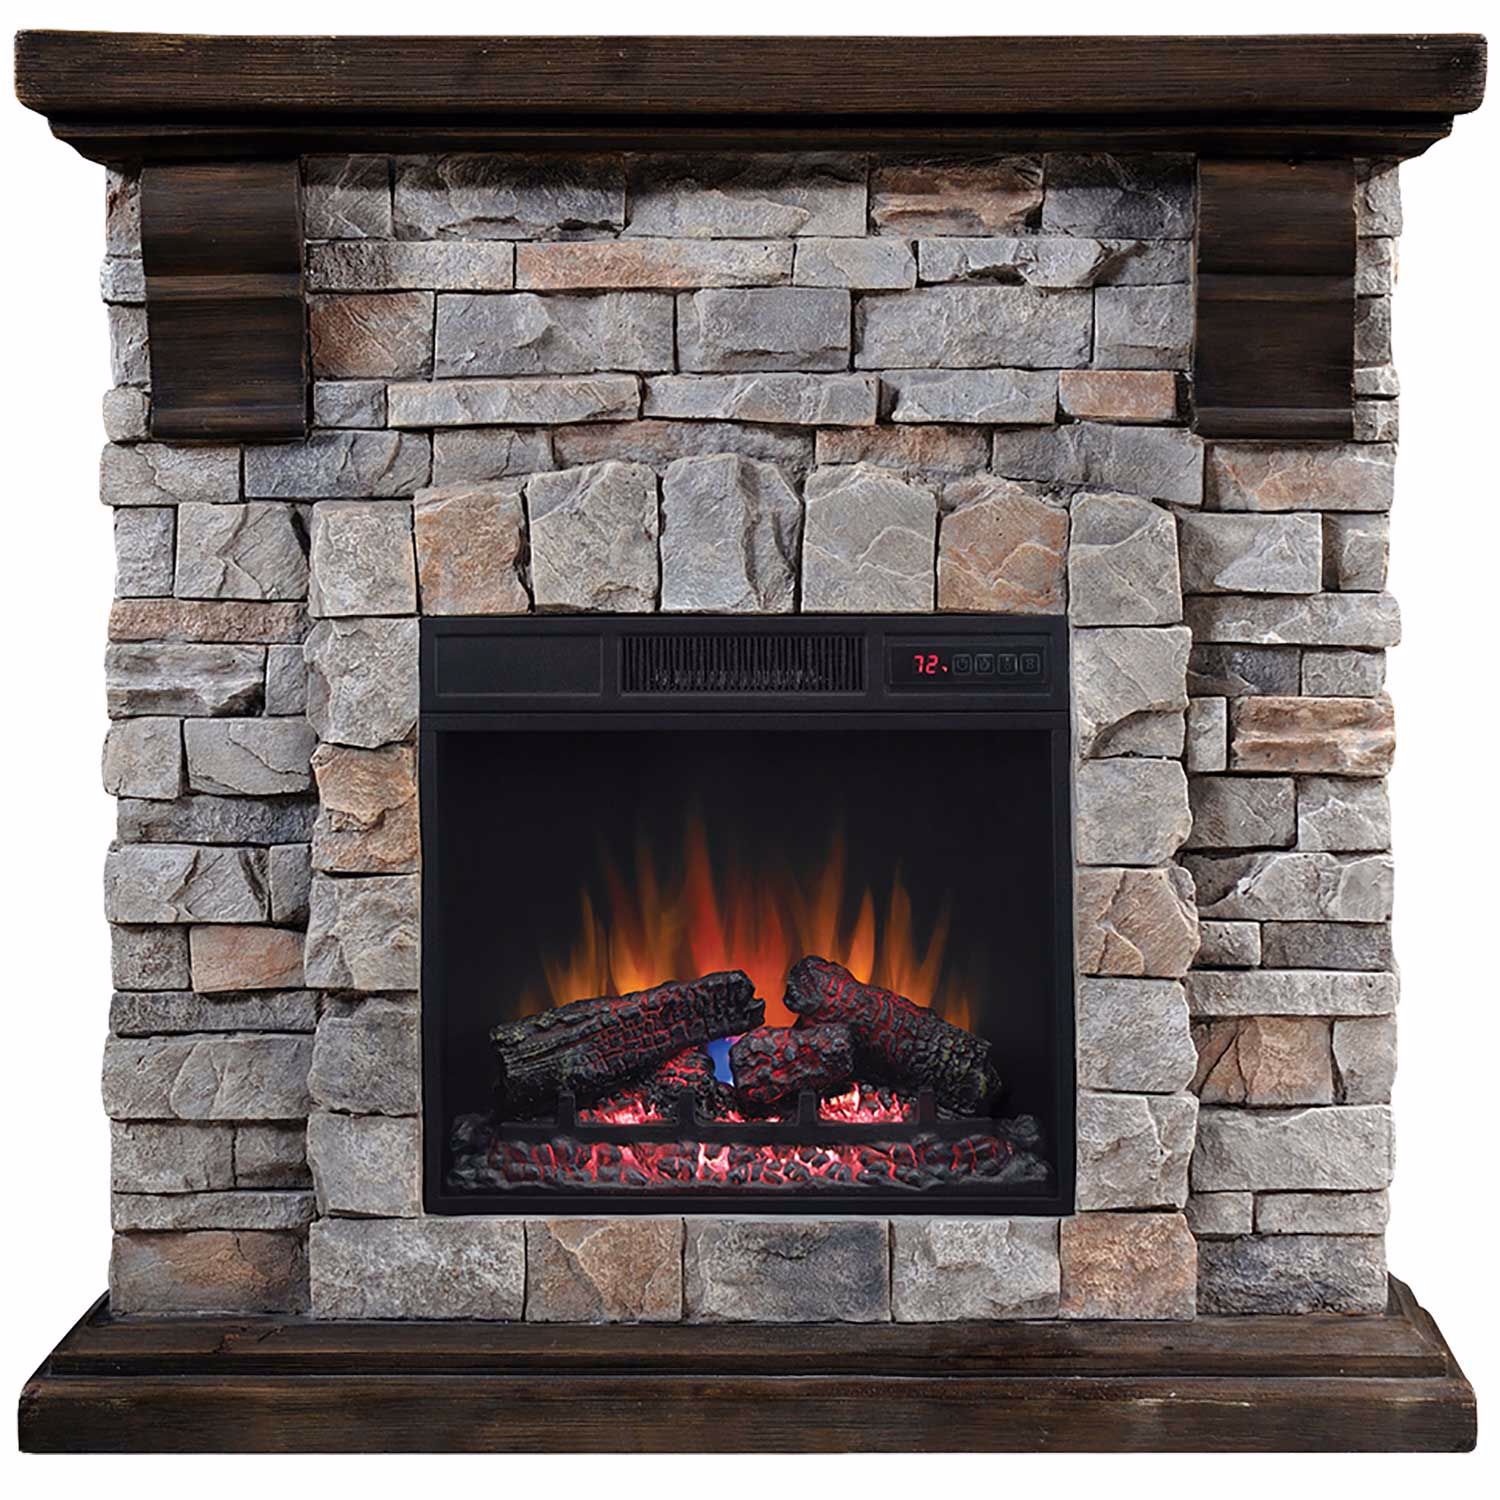 Pioneer Stone Fireplace with Insert 18-10400 | Classic Flame | AFW.com